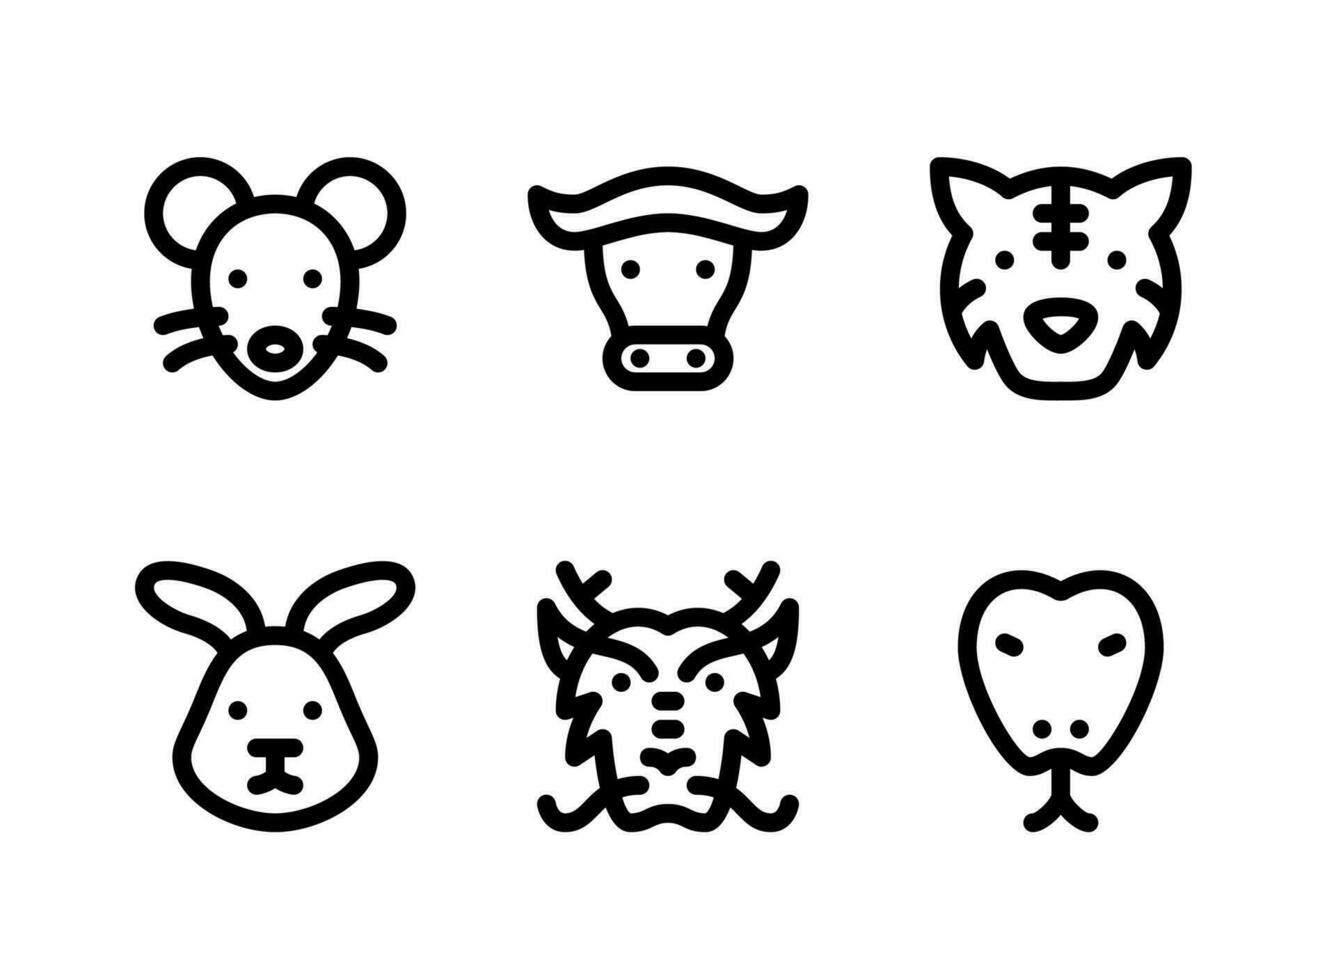 Simple Set of Animals Related Vector Line Icons. Contains Icons as Mouse, Buffalo, Tiger and more.